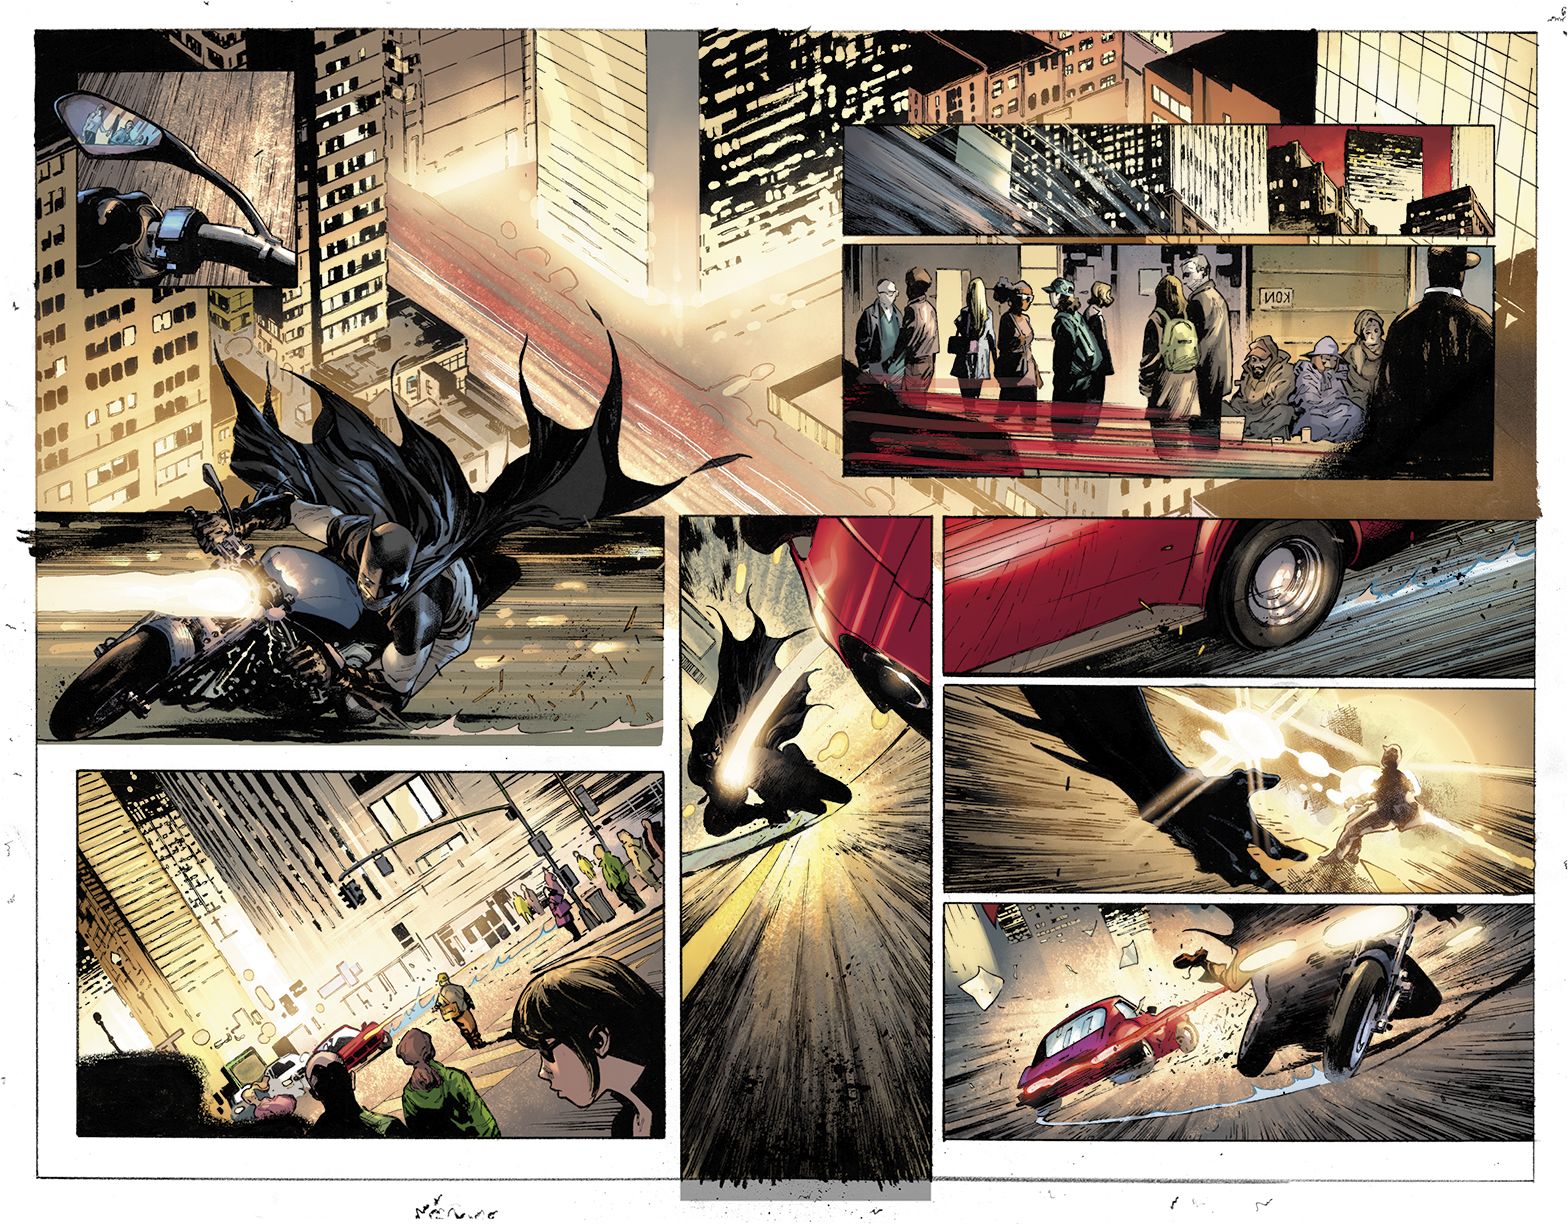 Preview pages for John Ridley and Olivier Coipel's I Am Batman #1